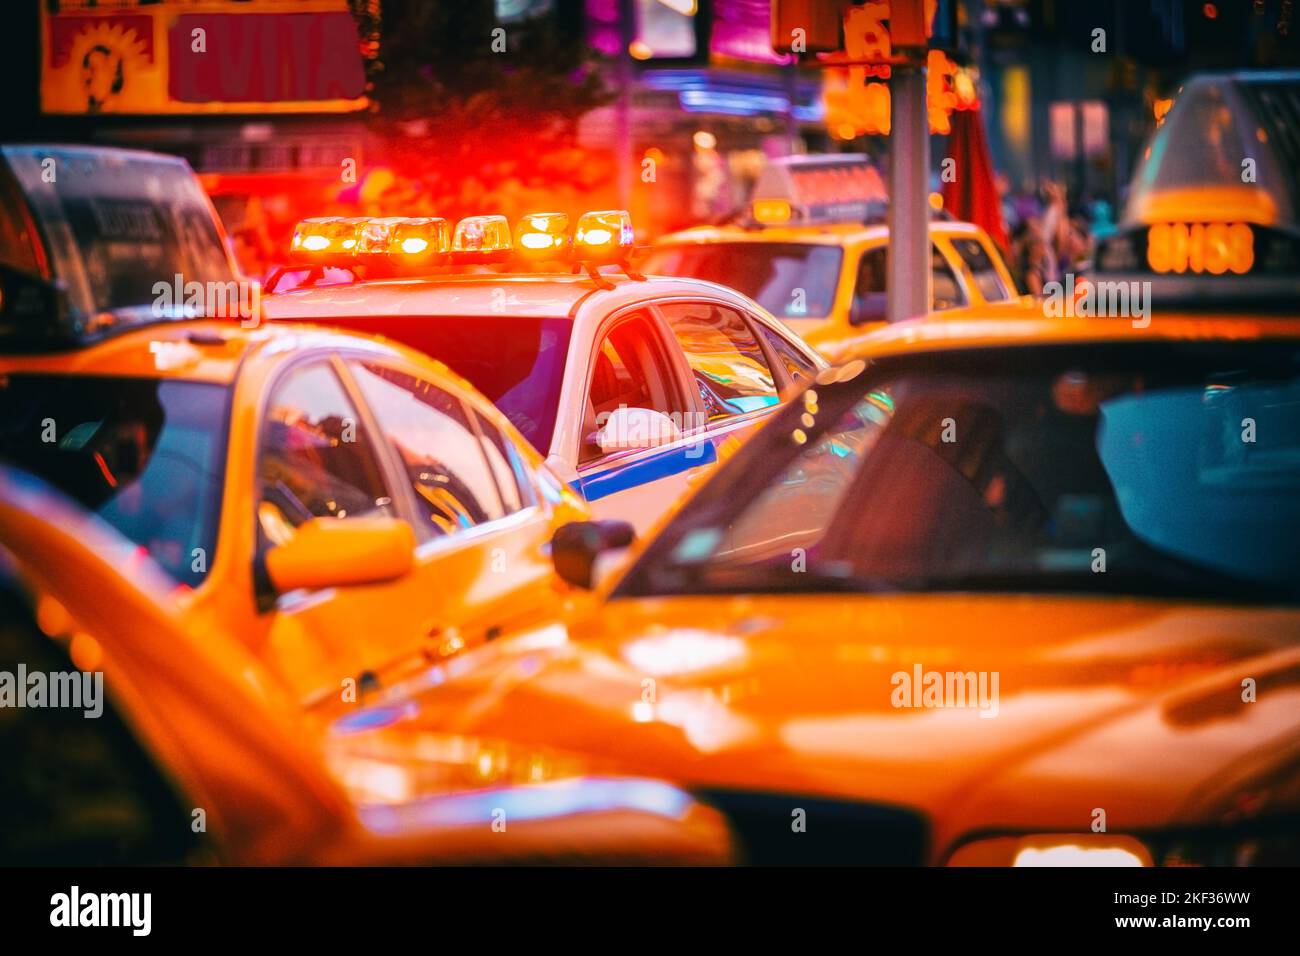 New York City Police patrol car flashing beacon siren lights in busy NYC traffic jam with yellow taxi cabs cars. Urban background Stock Photo